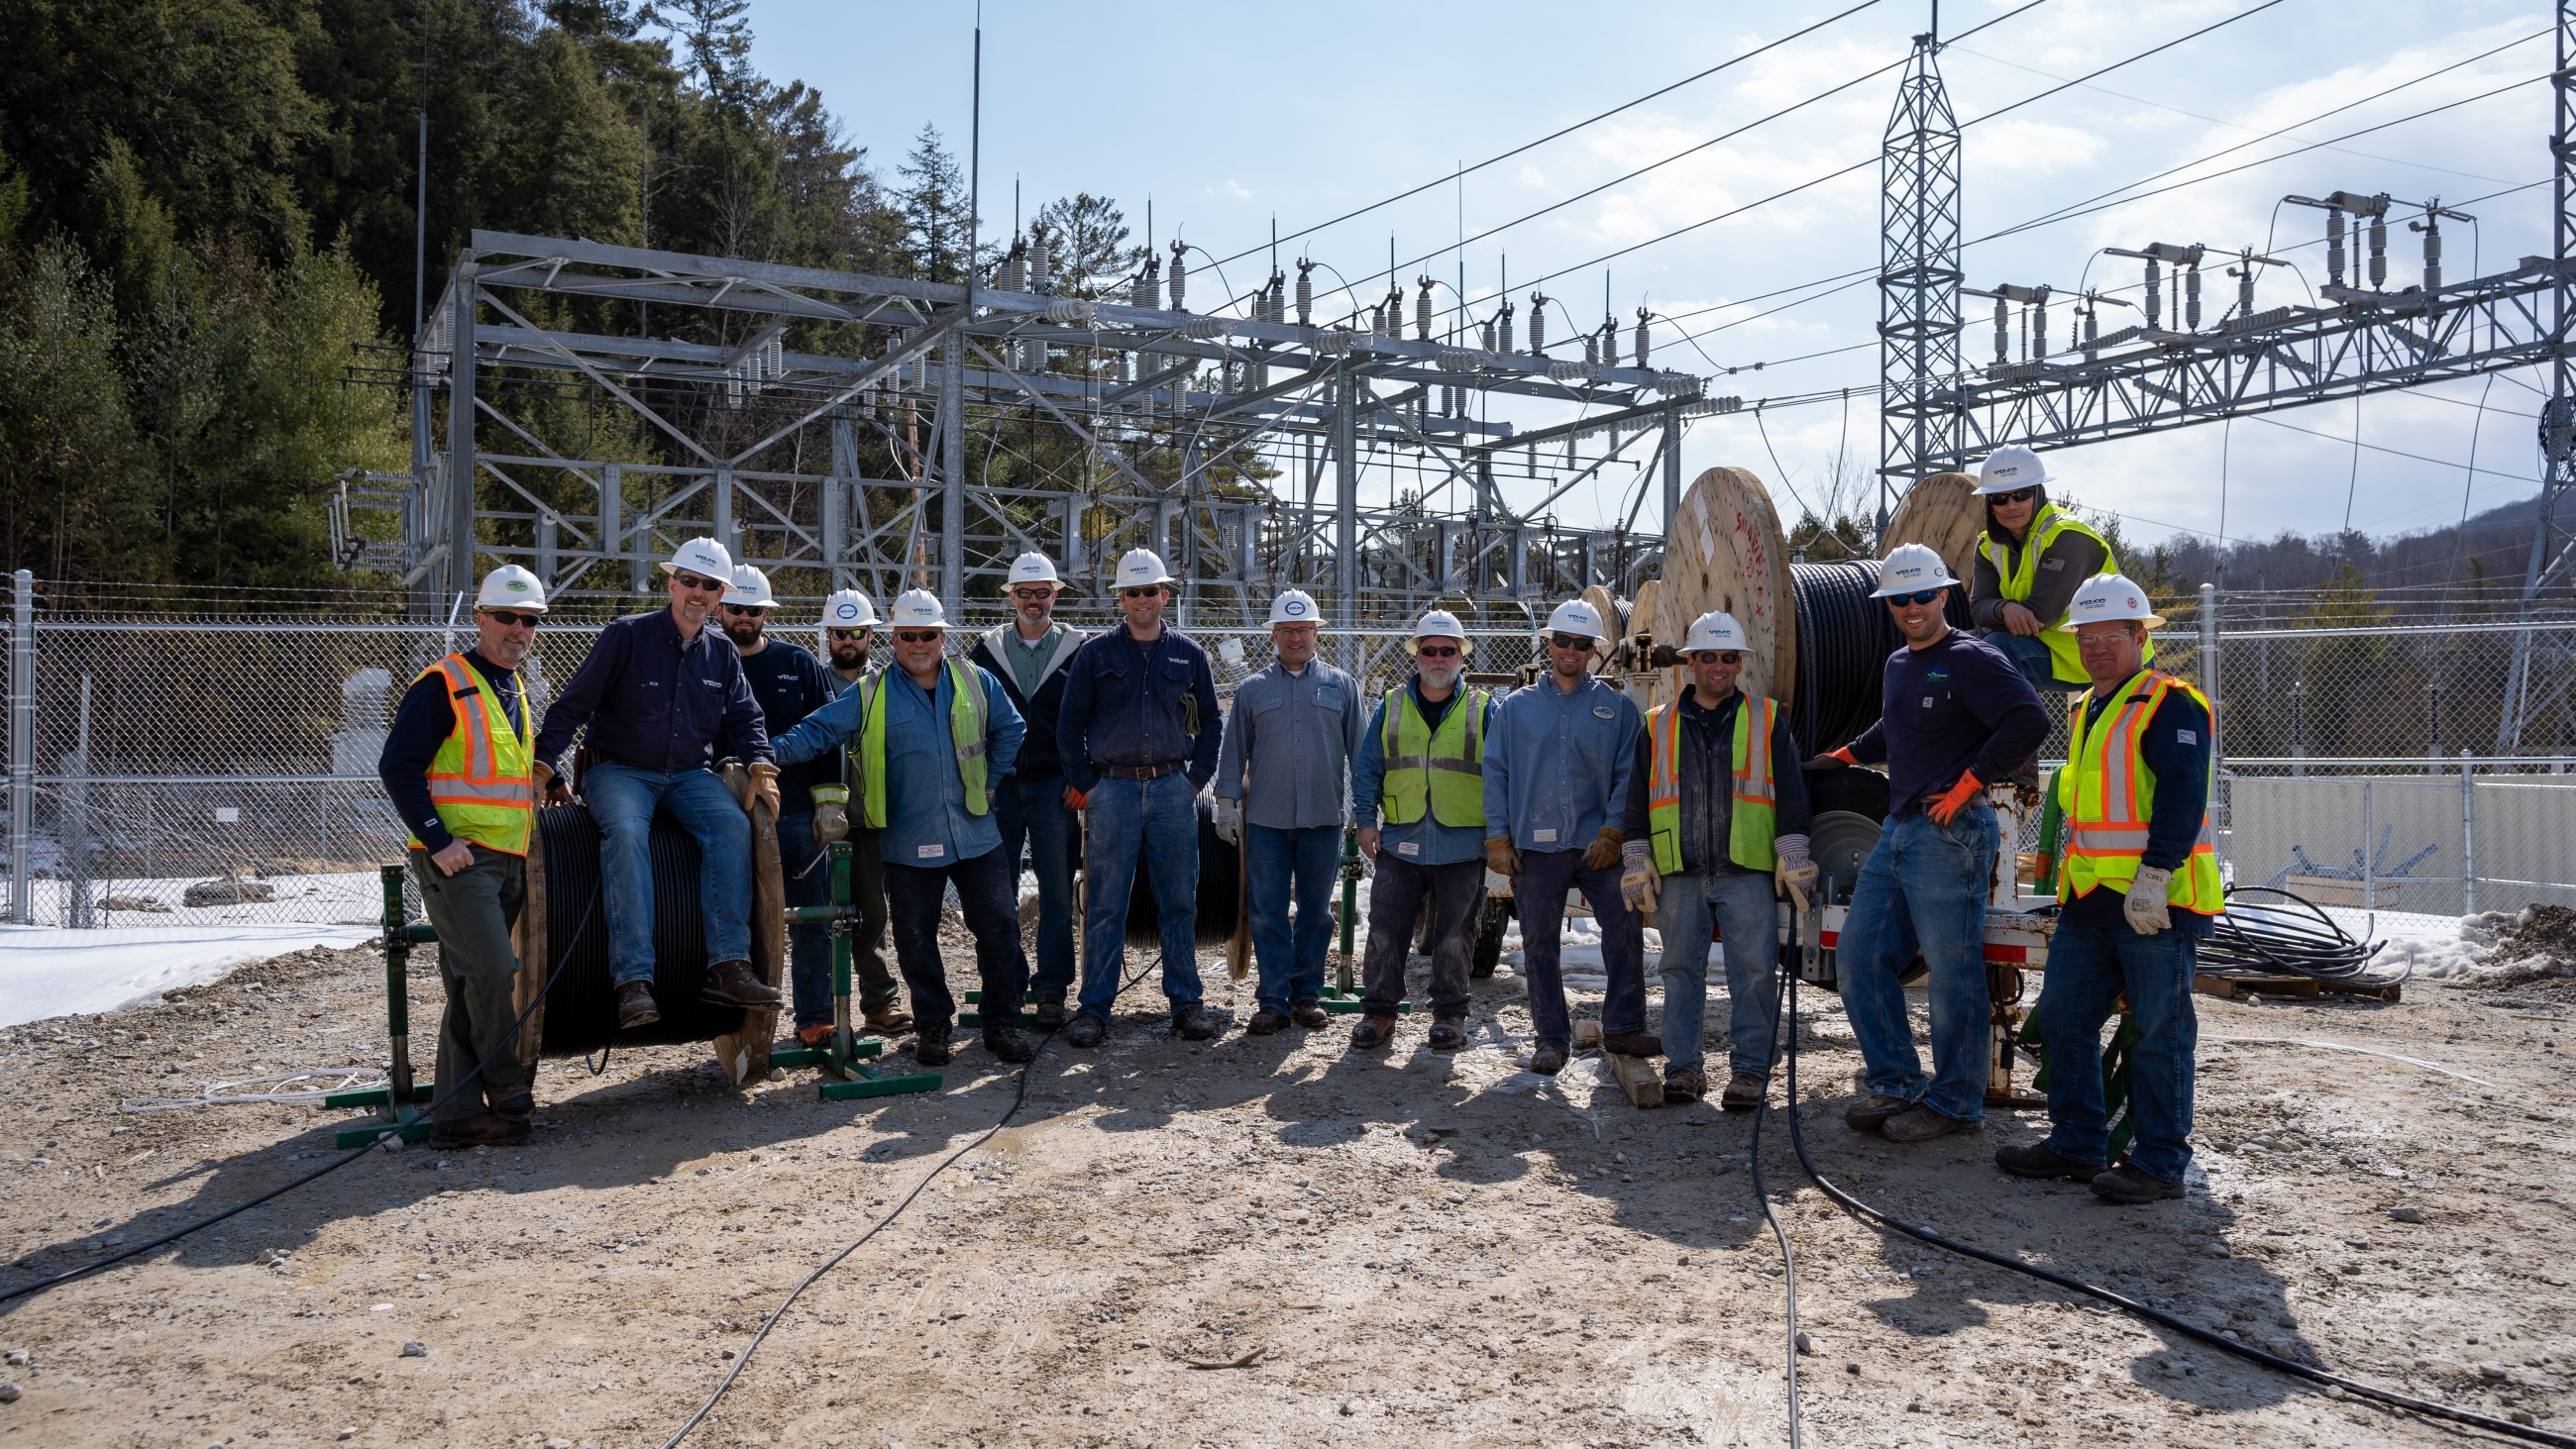 Who We Are  Vermont Electric Power Company